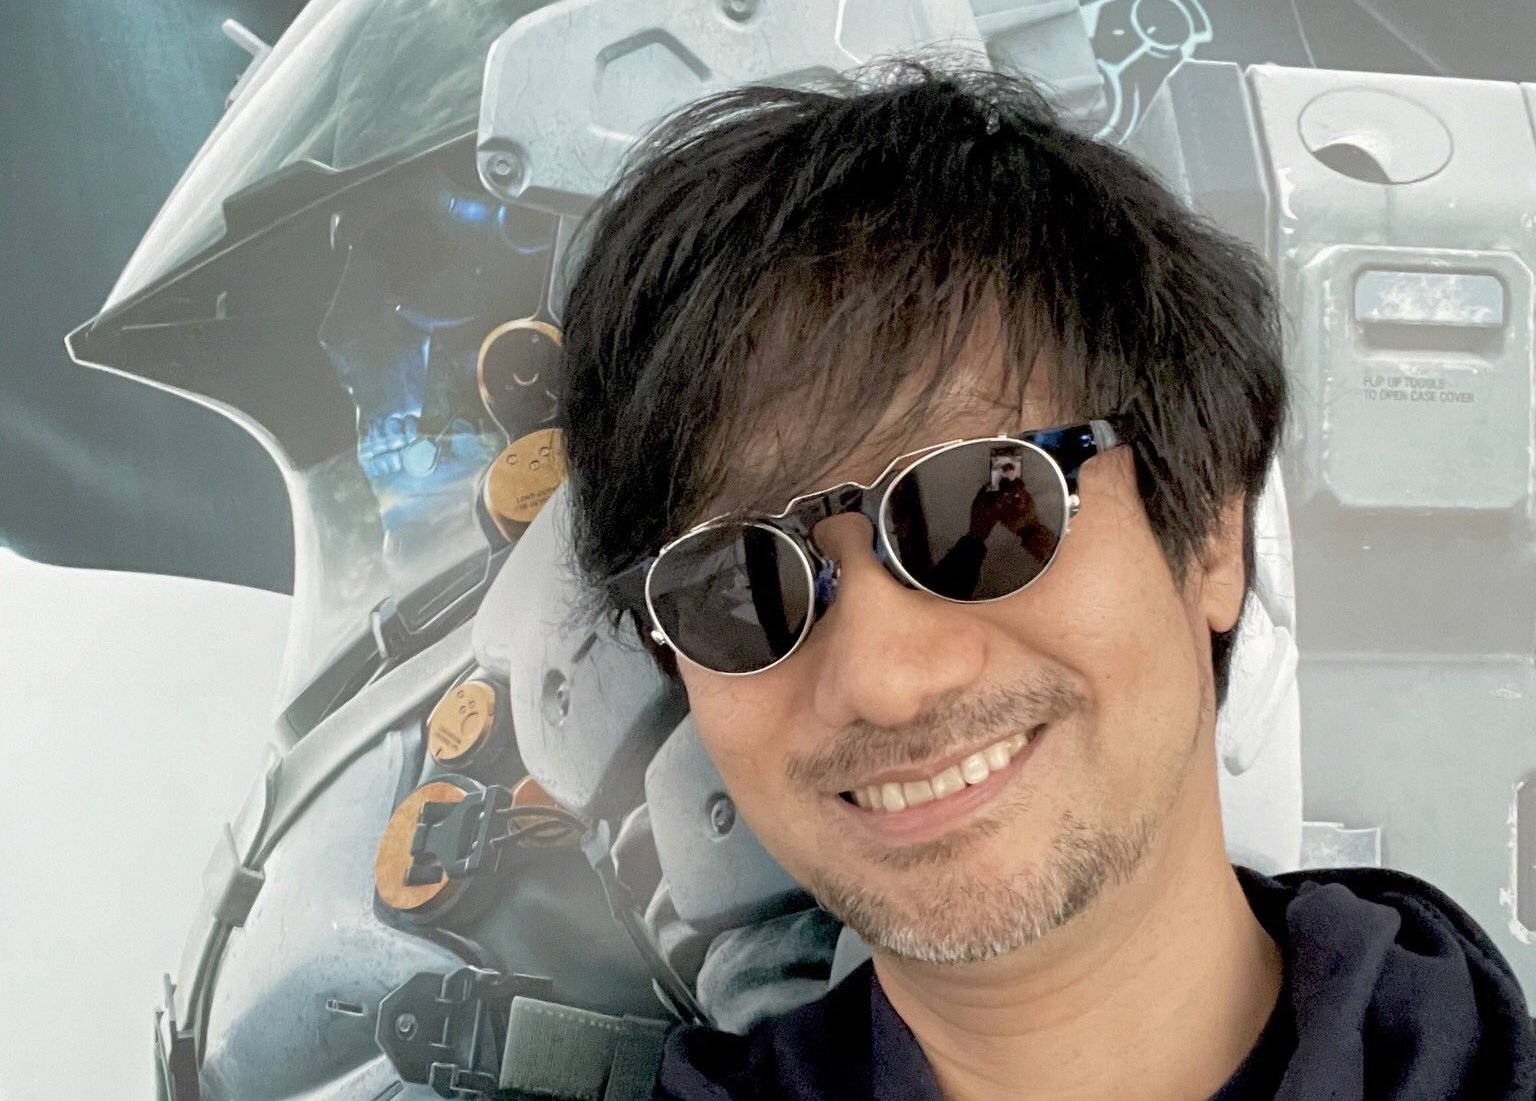 Hideo Kojima is hoping to reveal his ‘completely new game’ in 2023